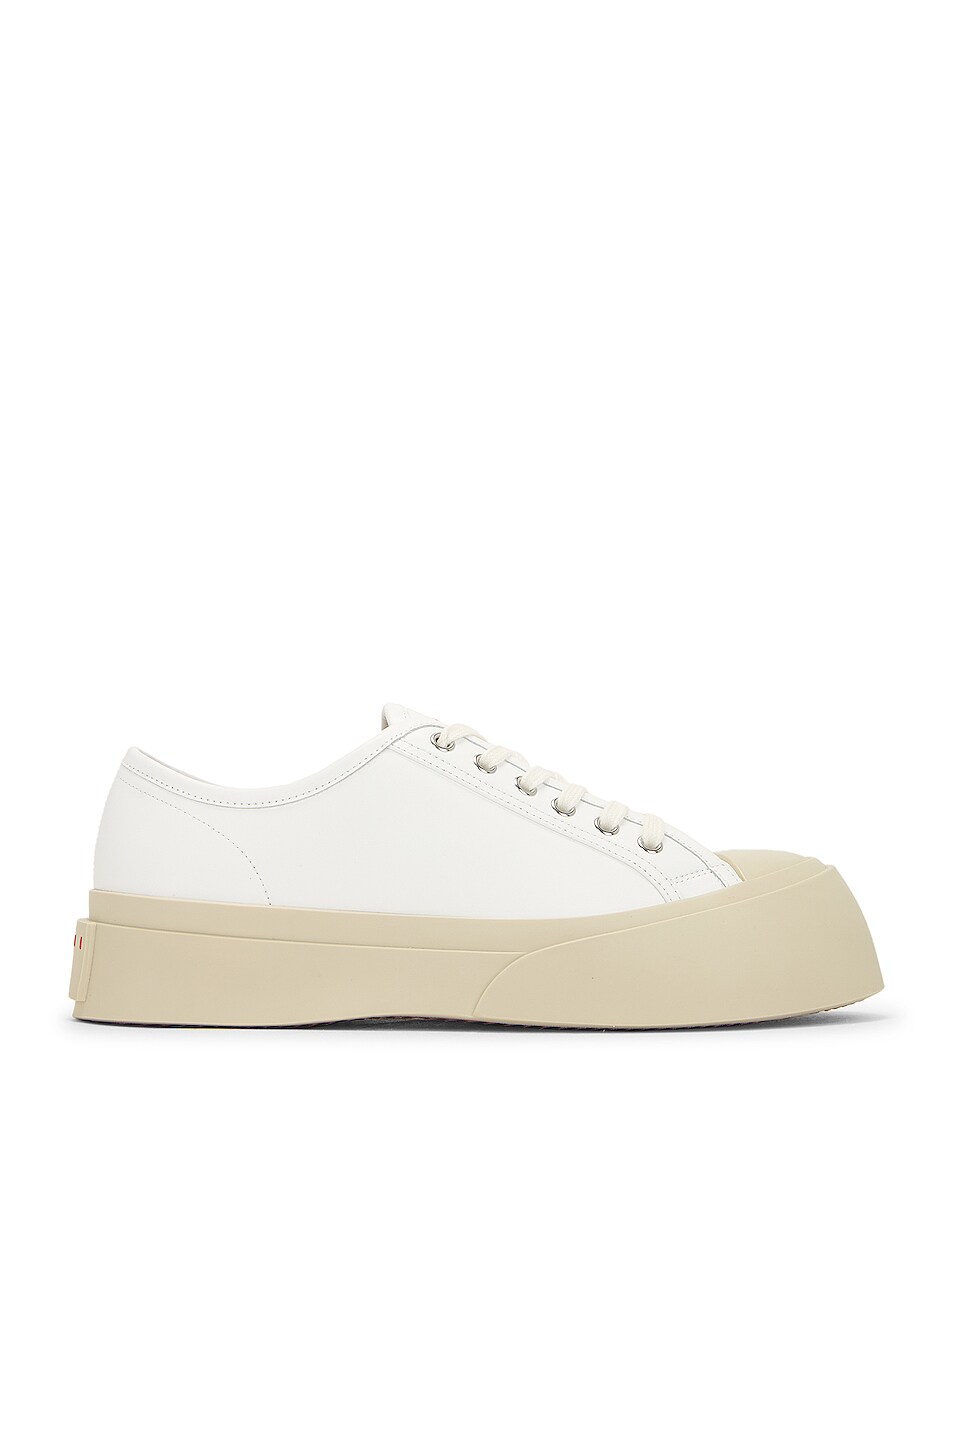 Marni Pablo Lace-Up Sneakers in Lily White | FWRD